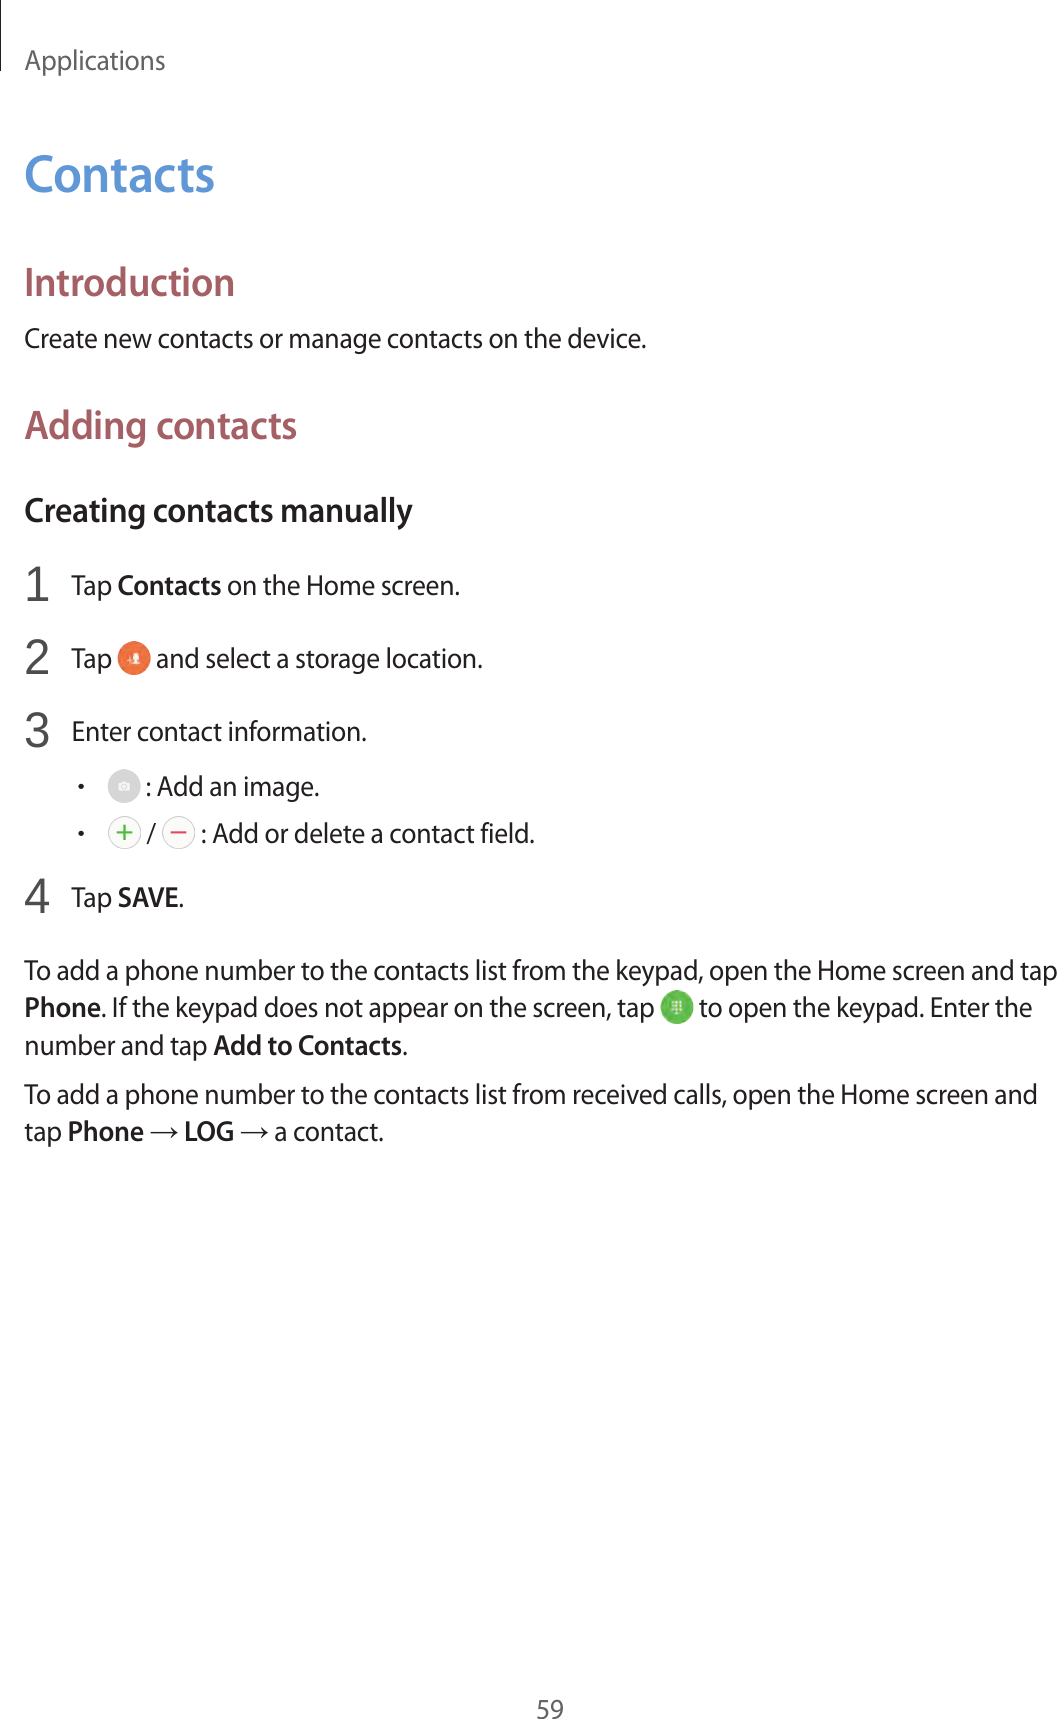 Applications59ContactsIntroductionCreate new contacts or manage contacts on the device.Adding contactsCreating contacts manually1  Tap Contacts on the Home screen.2  Tap   and select a storage location.3  Enter contact information.• : Add an image.• /   : Add or delete a contact field.4  Tap SAVE.To add a phone number to the contacts list from the keypad, open the Home screen and tap Phone. If the keypad does not appear on the screen, tap   to open the keypad. Enter the number and tap Add to Contacts.To add a phone number to the contacts list from received calls, open the Home screen and tap Phone → LOG → a contact.